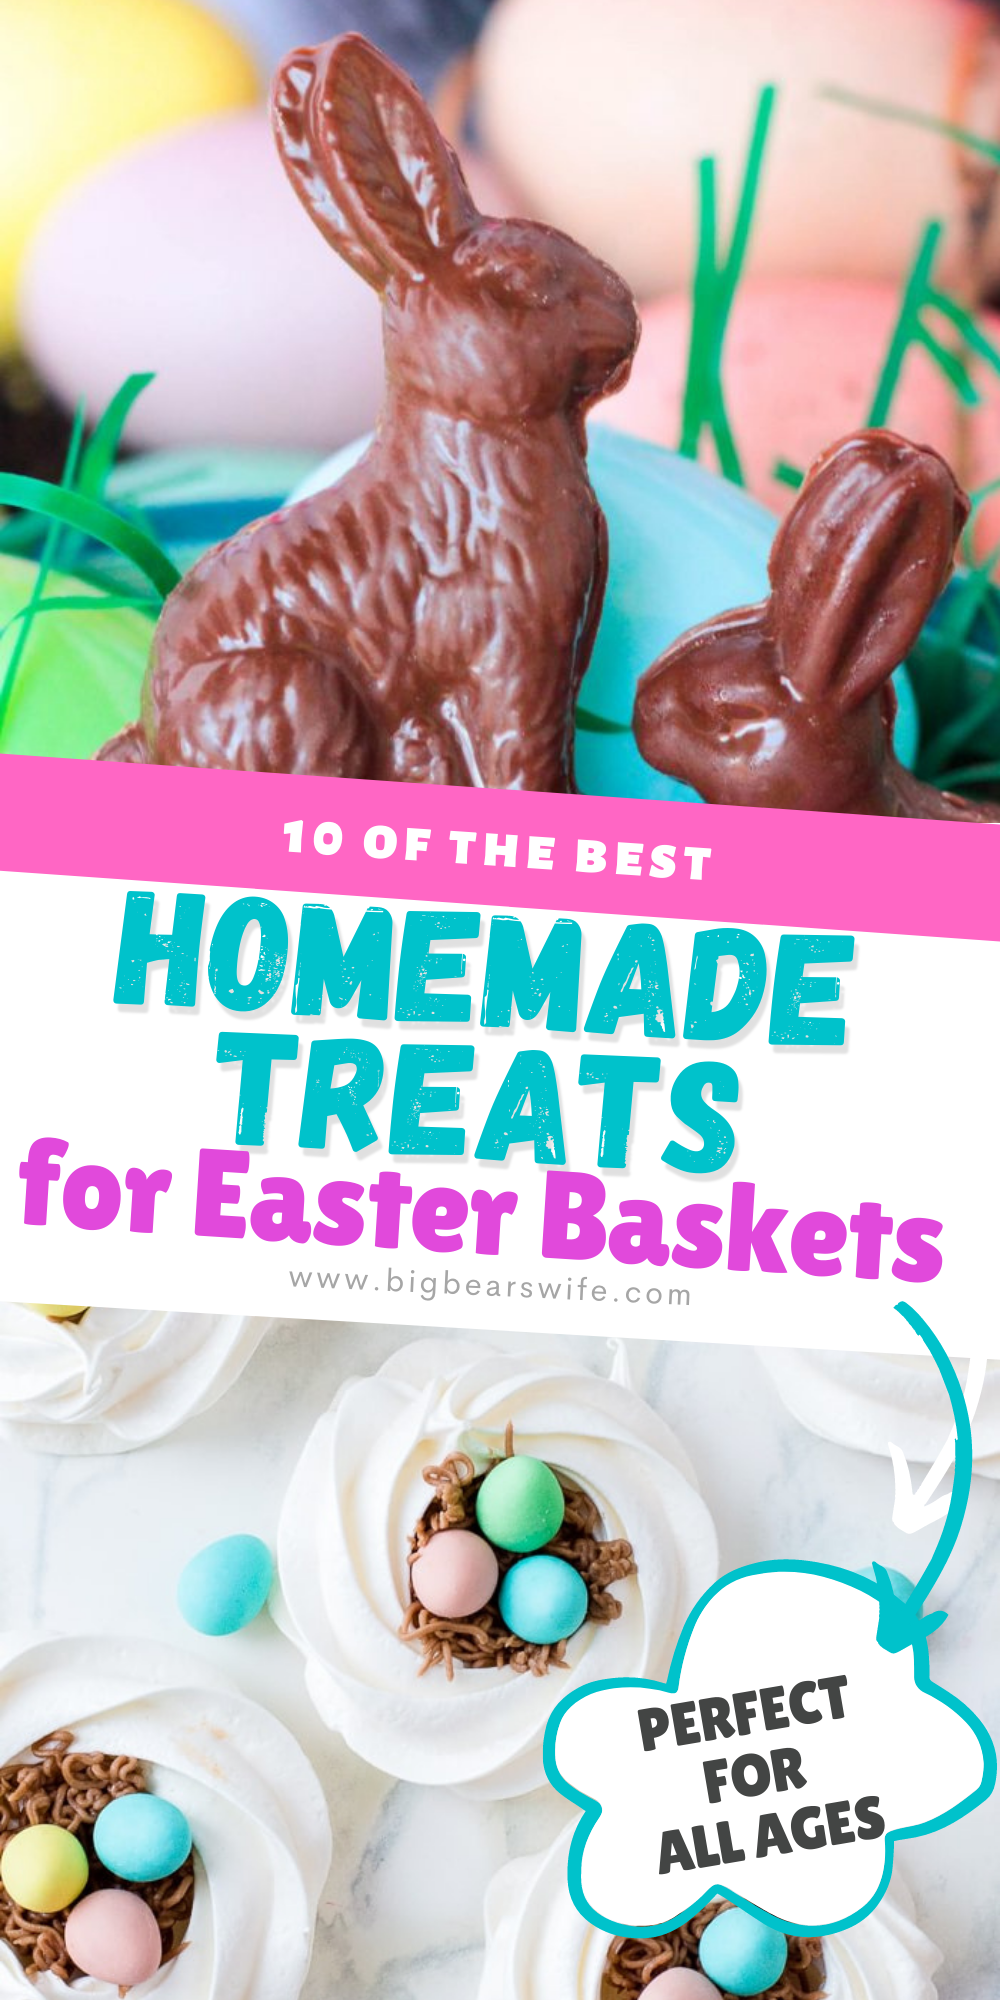 If you're filling Easter baskets for your kids or grandchildren this year or maybe just helping the Easter Bunny with some ideas, you'll love these Homemade Easter Basket treats! Sure, store bought Easter surprises are neat but homemade treats are even better! Fill your little one's Easter basket with 10 of the best Homemade Treats for Easter Baskets this year! 

 via @bigbearswife